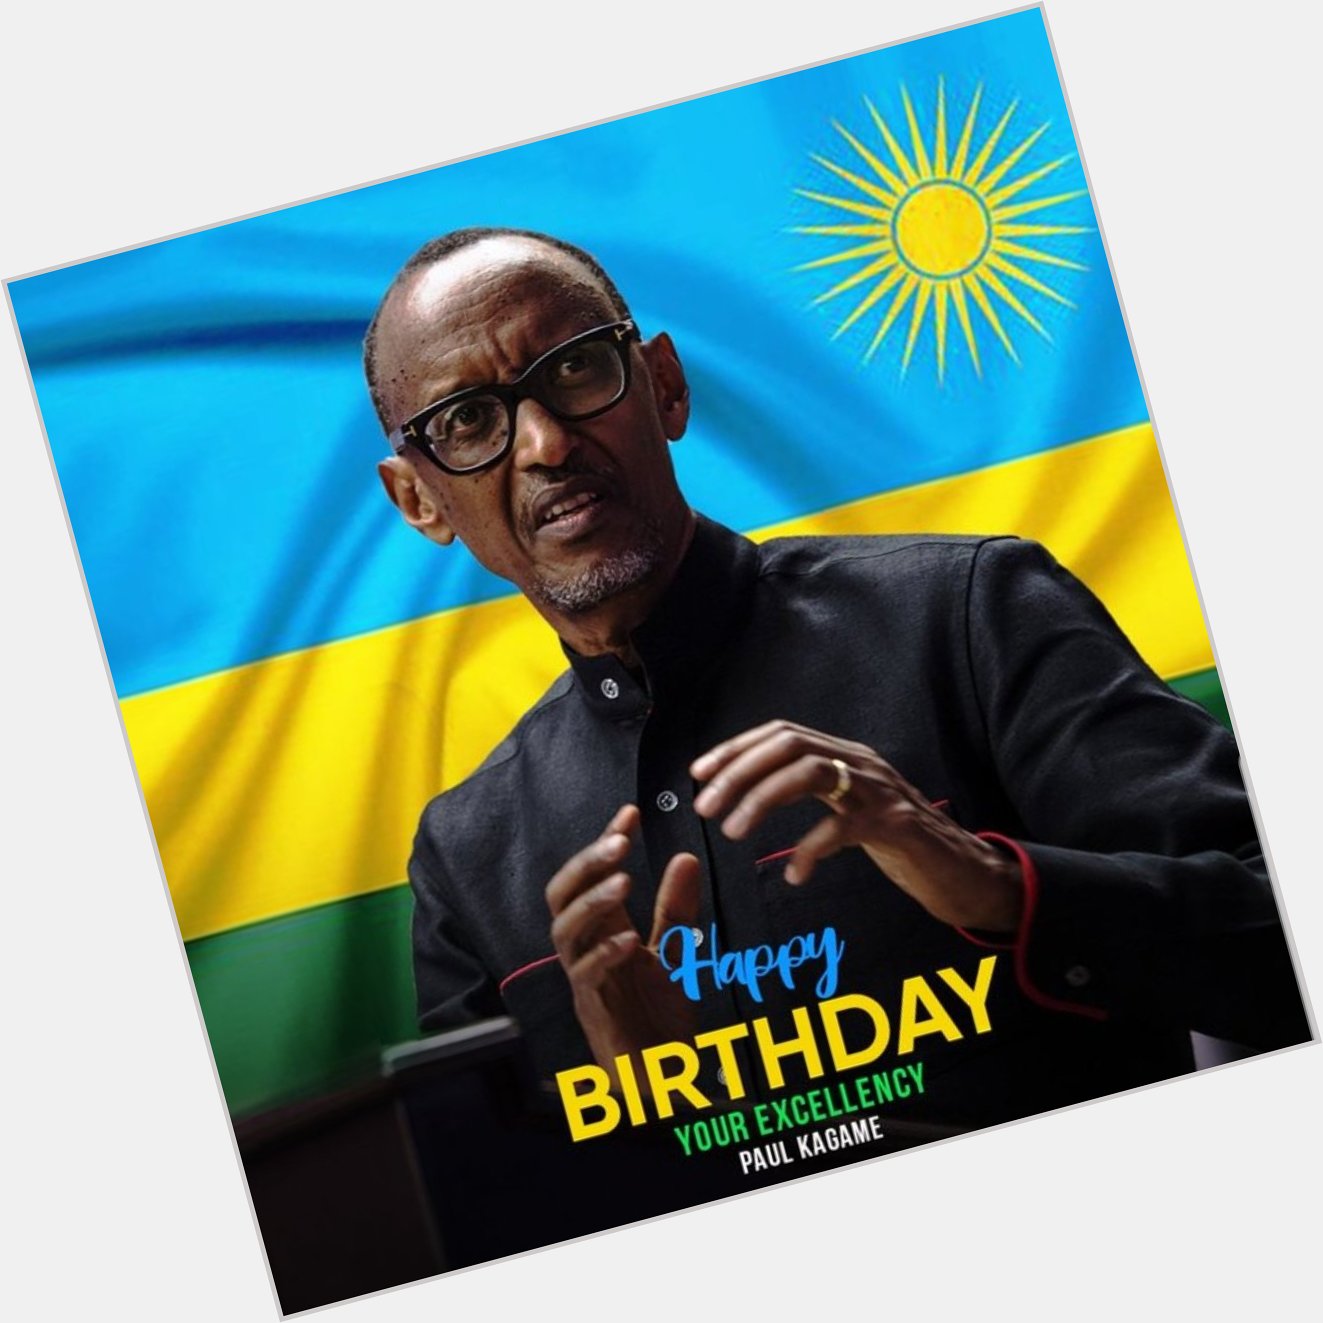 Happy birthday Father of the Nation H.E Paul kagame 
You are a great Inspiration to the youth. 